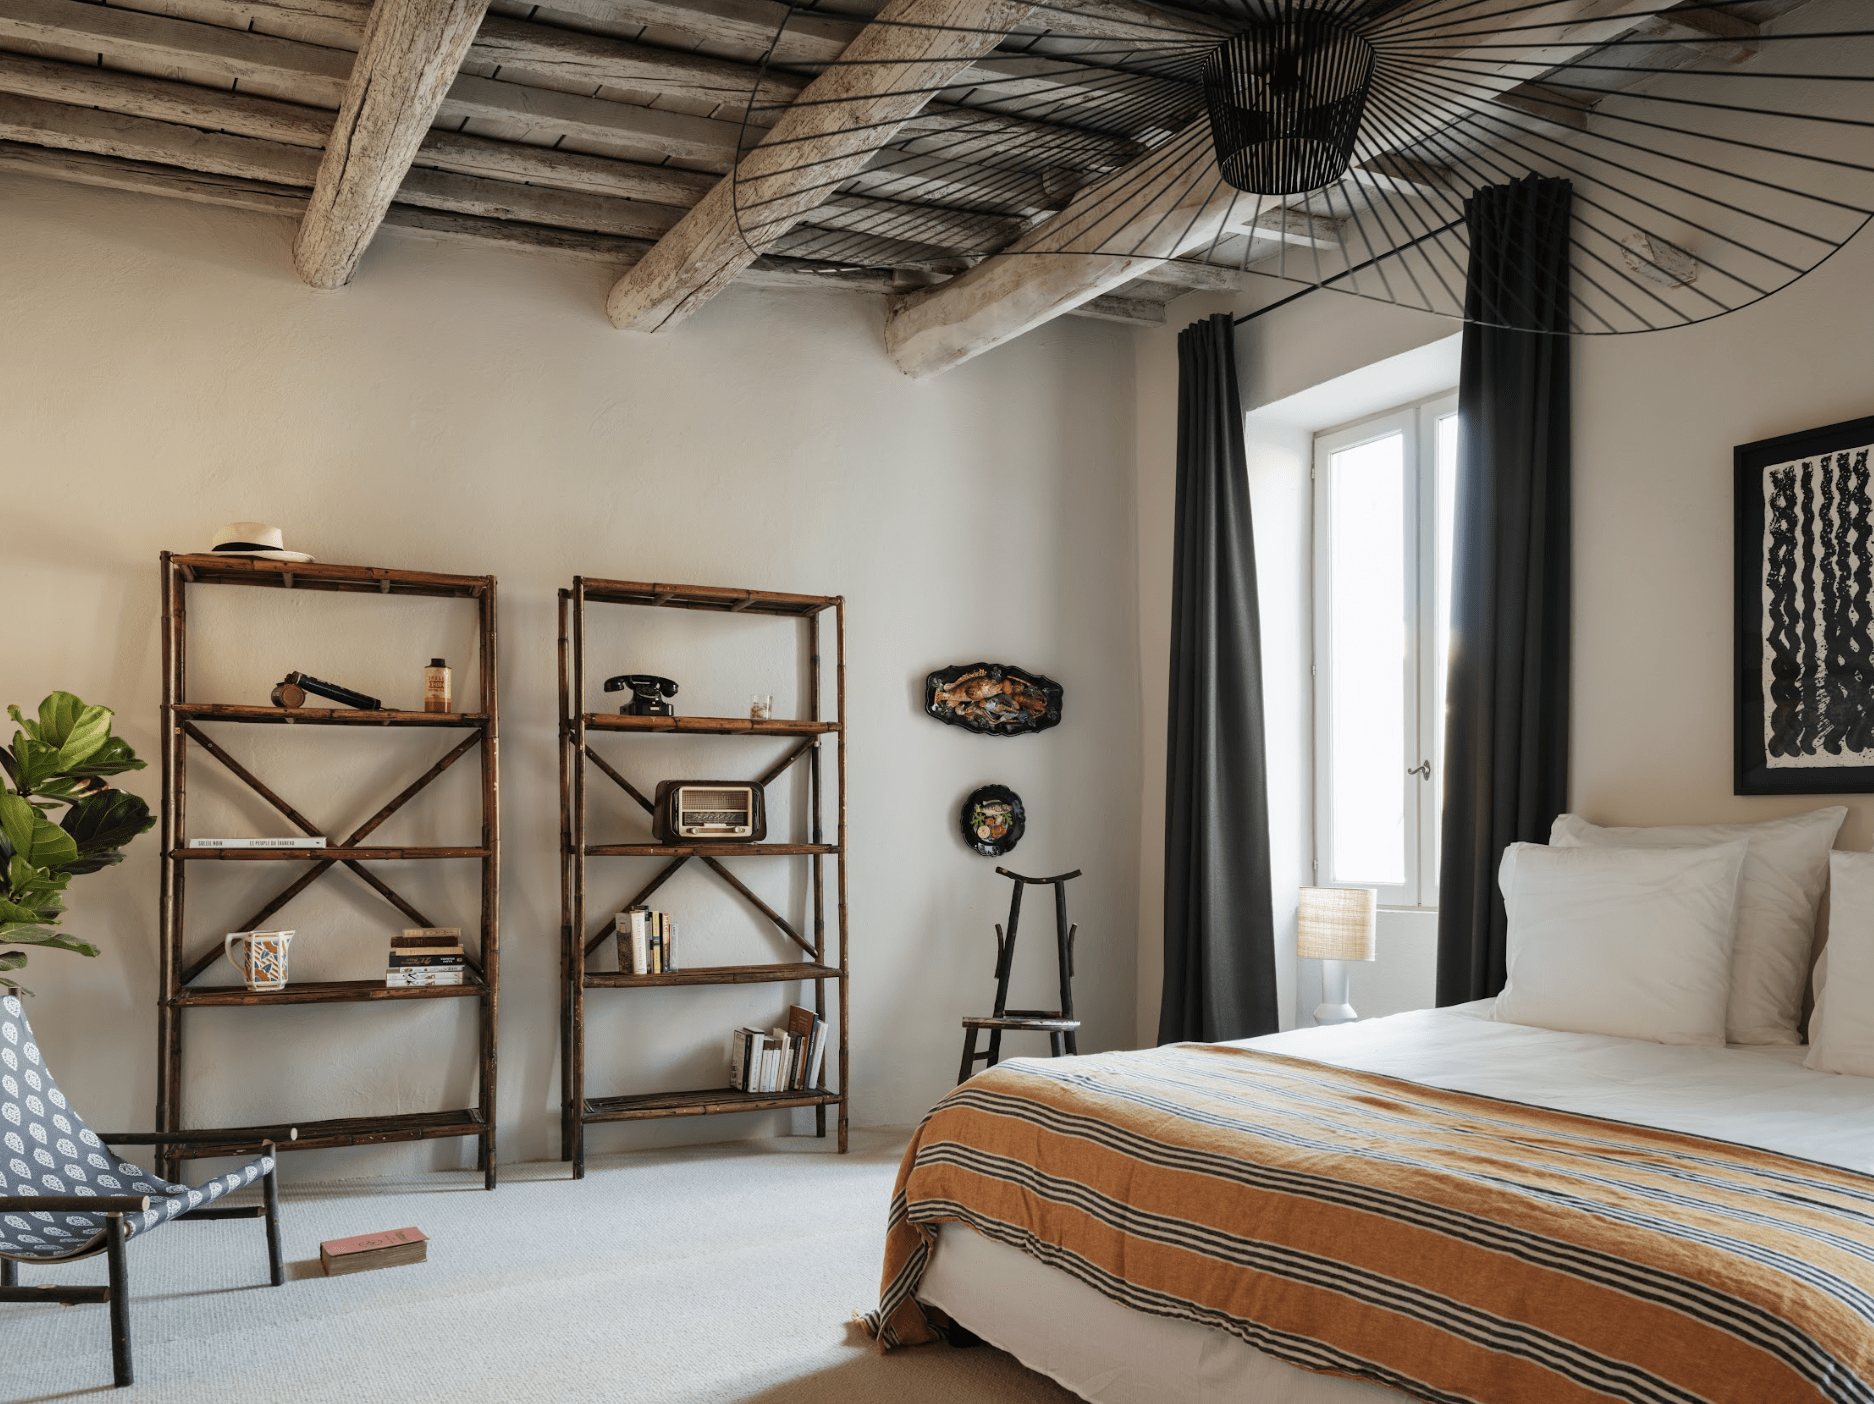 One of the bedrooms of the Maison des Remparts: bed, wooden bookshelf, beams.